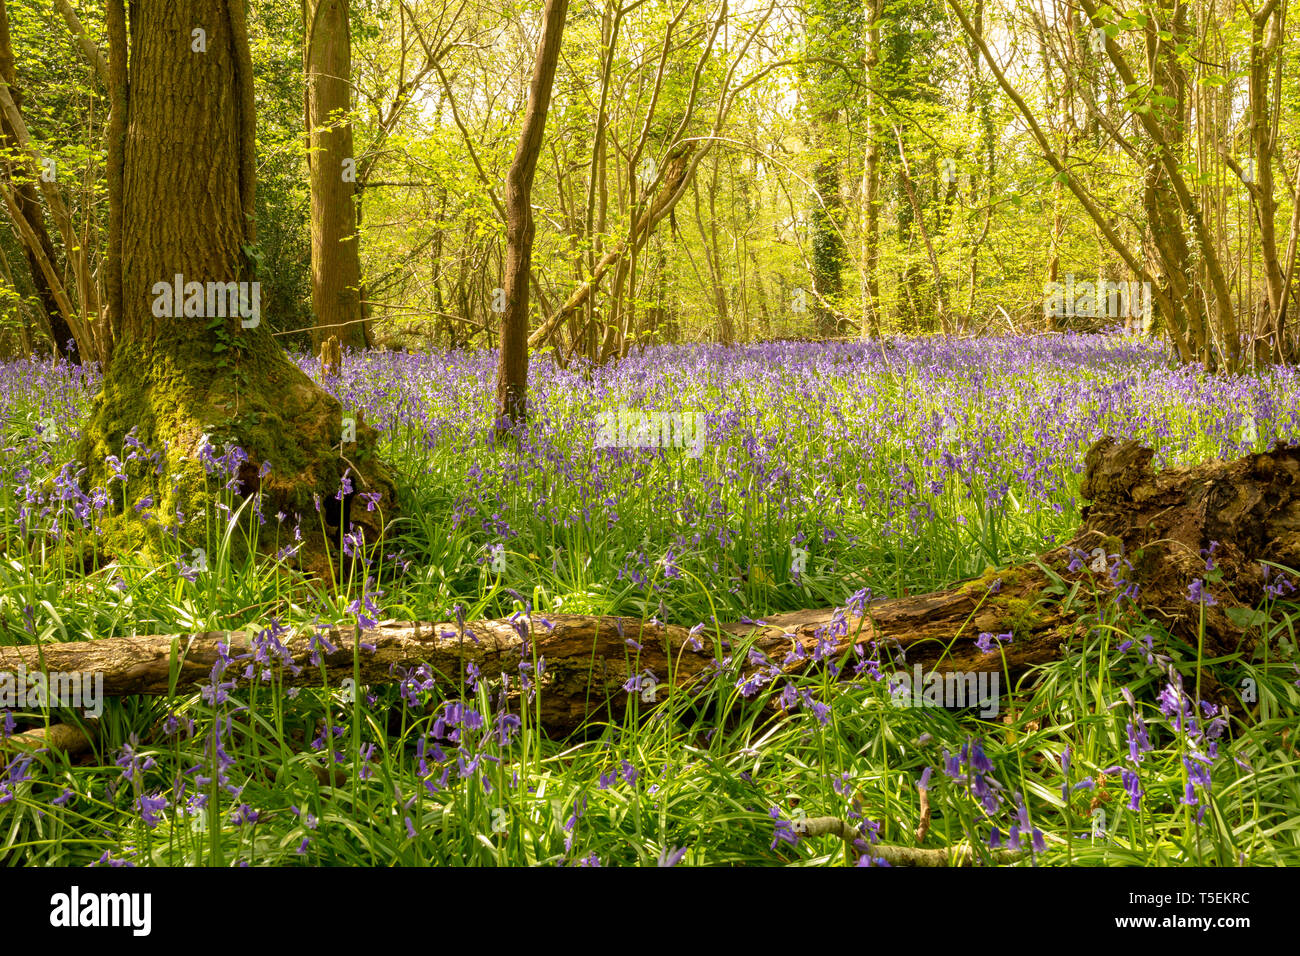 Colour landsape photograph of carpet of wild Bluebells in flower in ancient hazel and ash coppice with fallen dead wood in foreground. Dorset, UK. Stock Photo